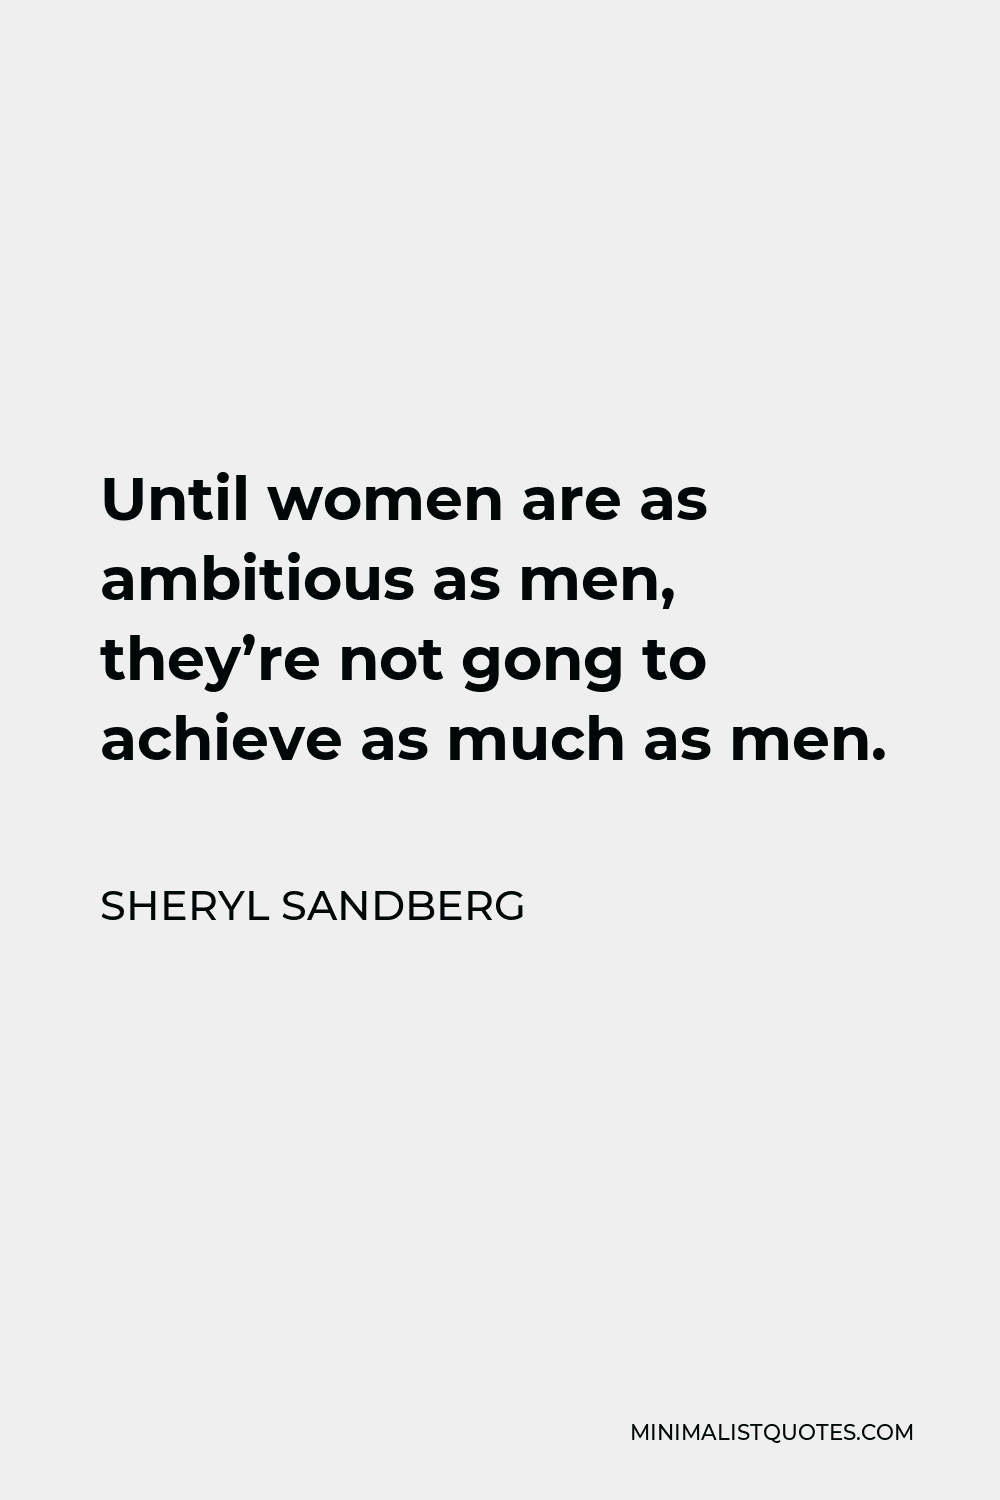 Sheryl Sandberg Quote - Until women are as ambitious as men, they’re not gong to achieve as much as men.